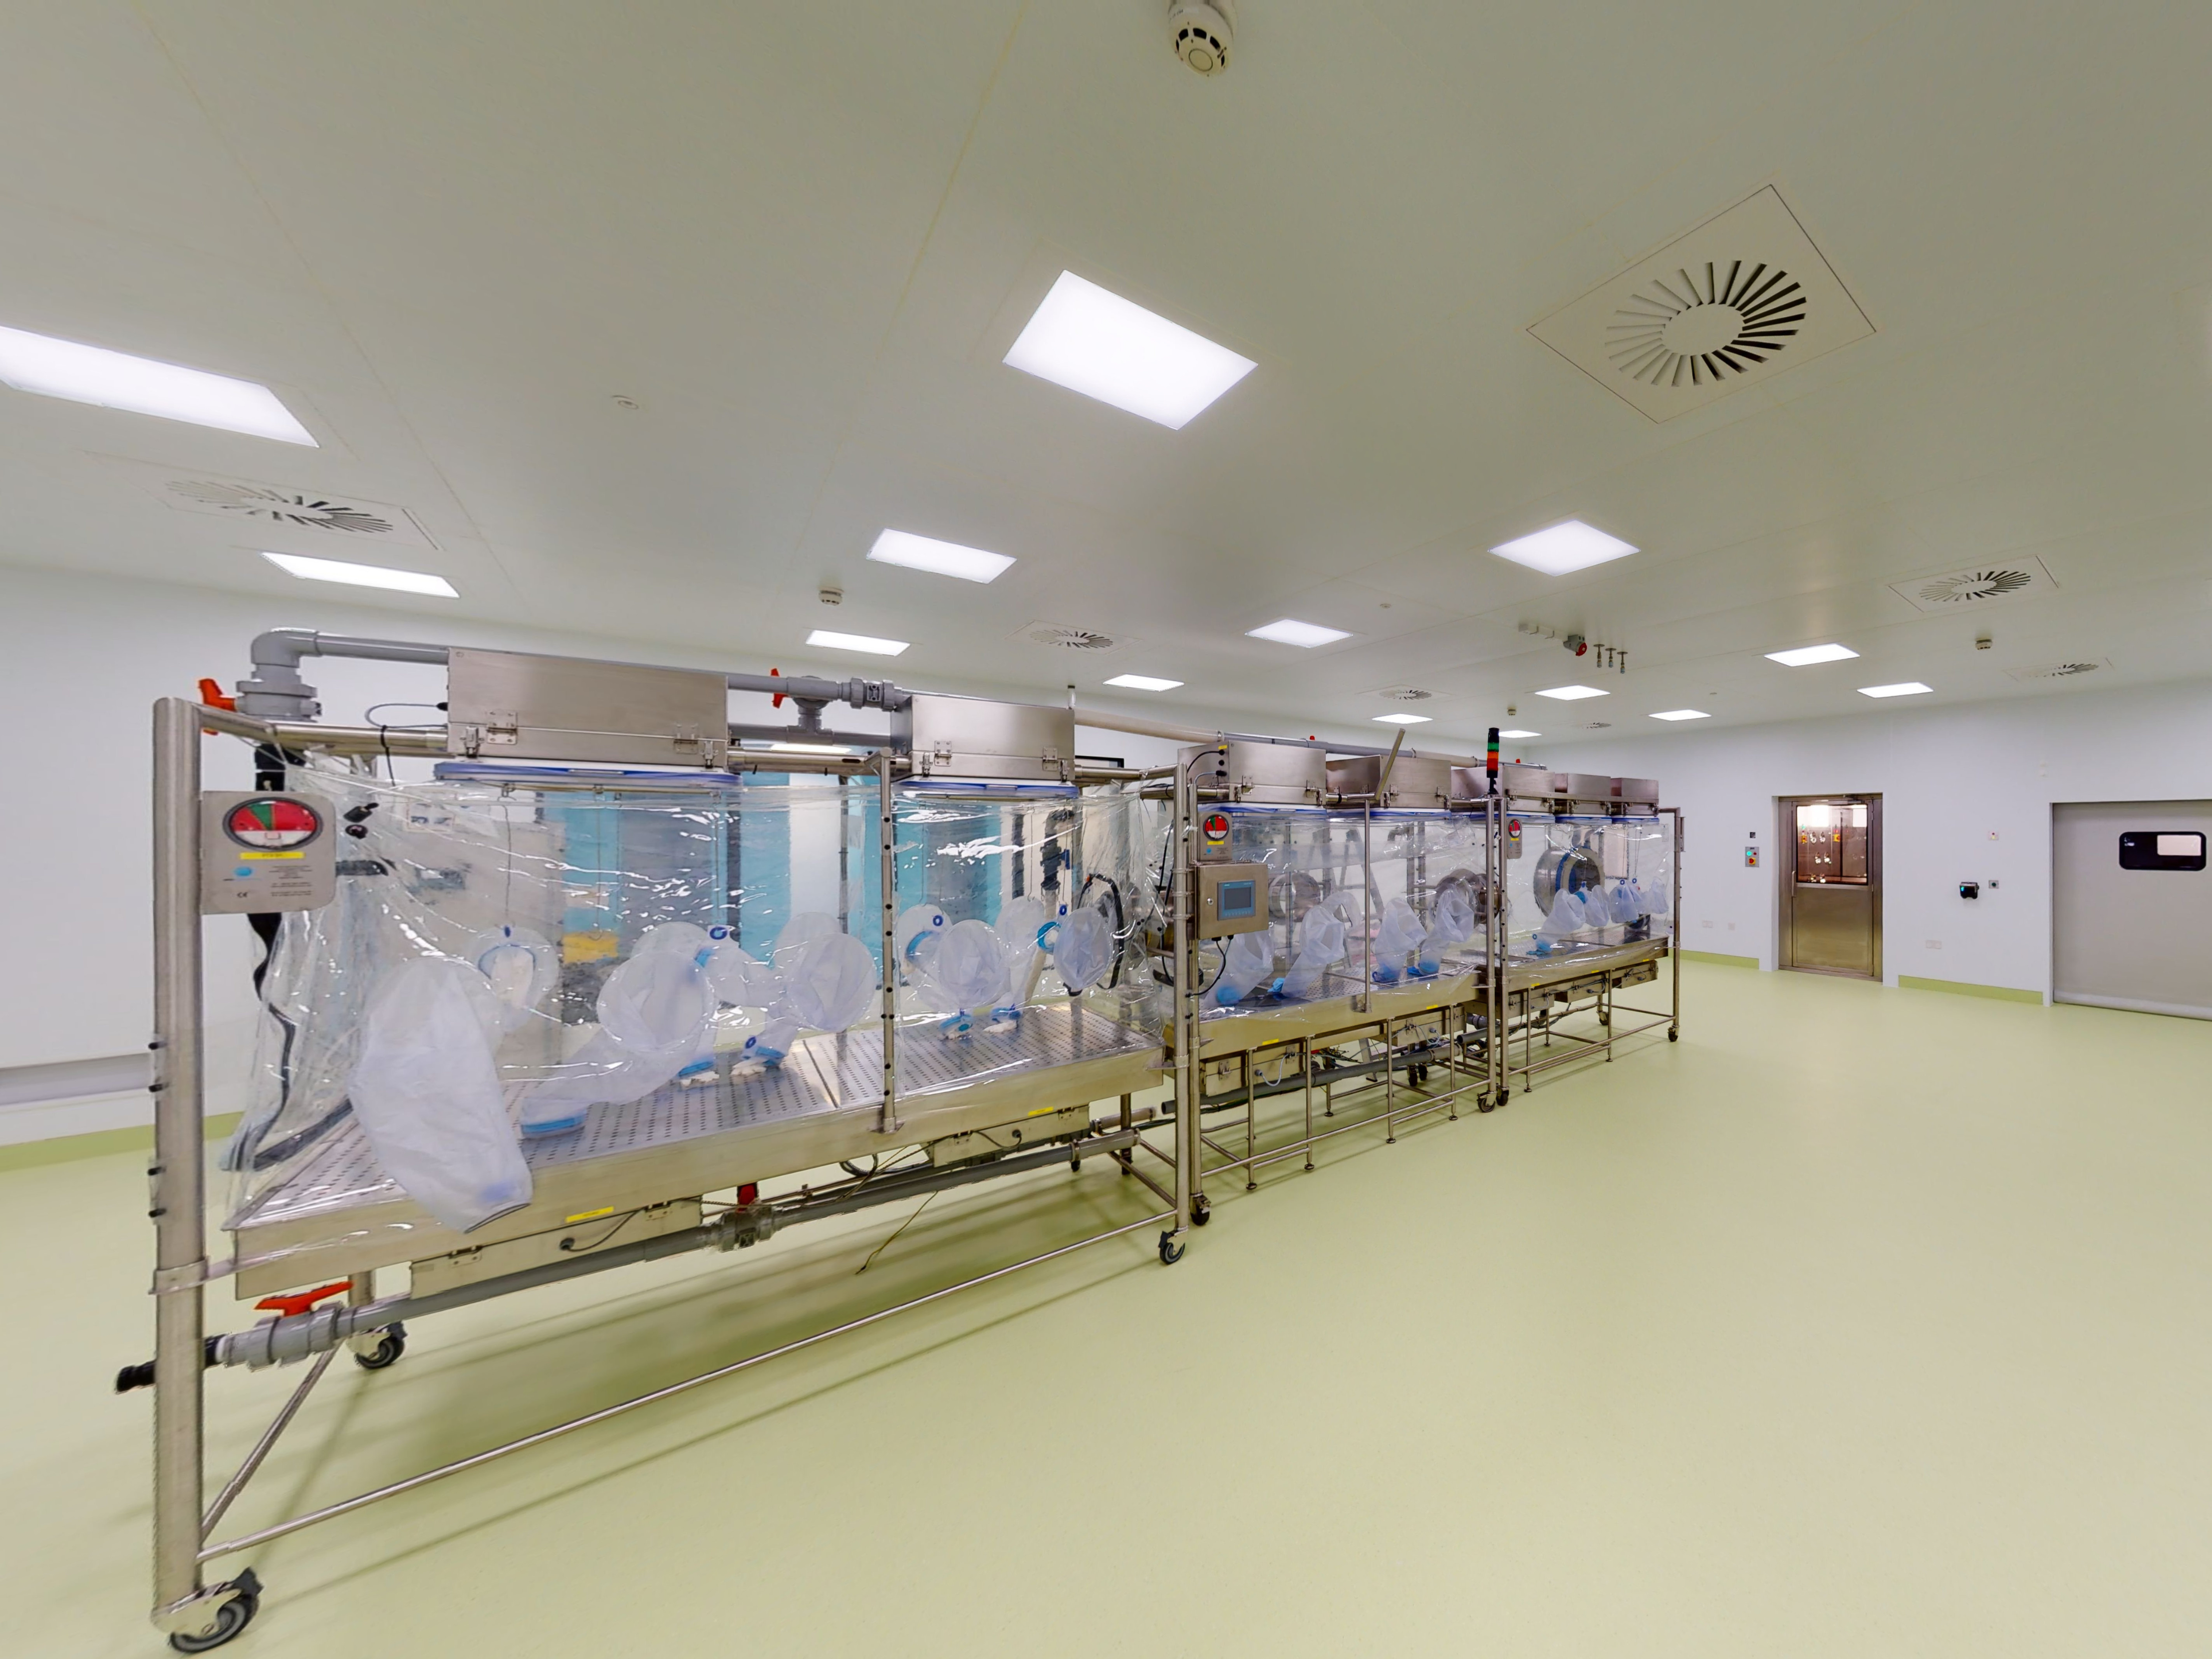 Case study: Using dynamic air control in a cleanroom